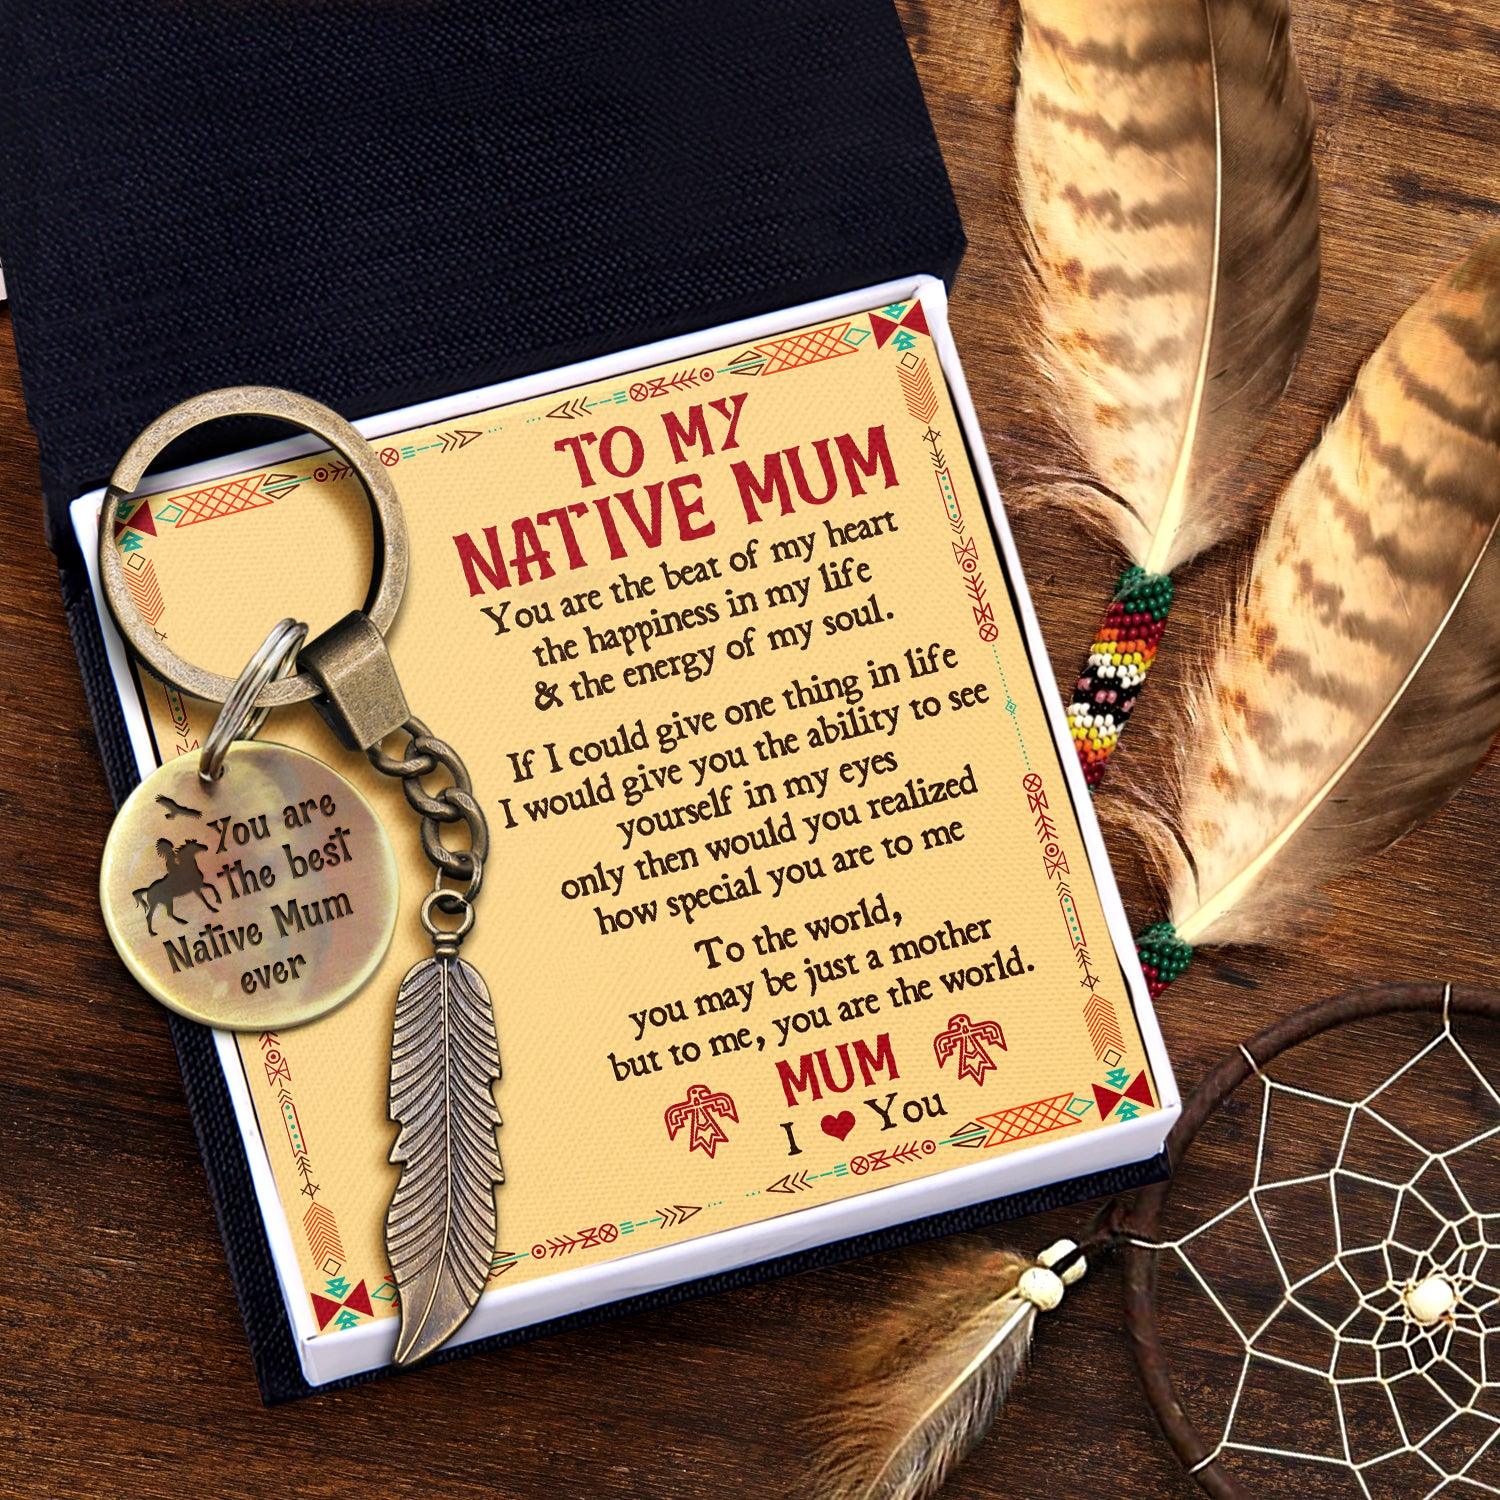 Feather Keychain - Native American - To My Native Mum - How Special You Are To Me - Augkdz19001 - Gifts Holder